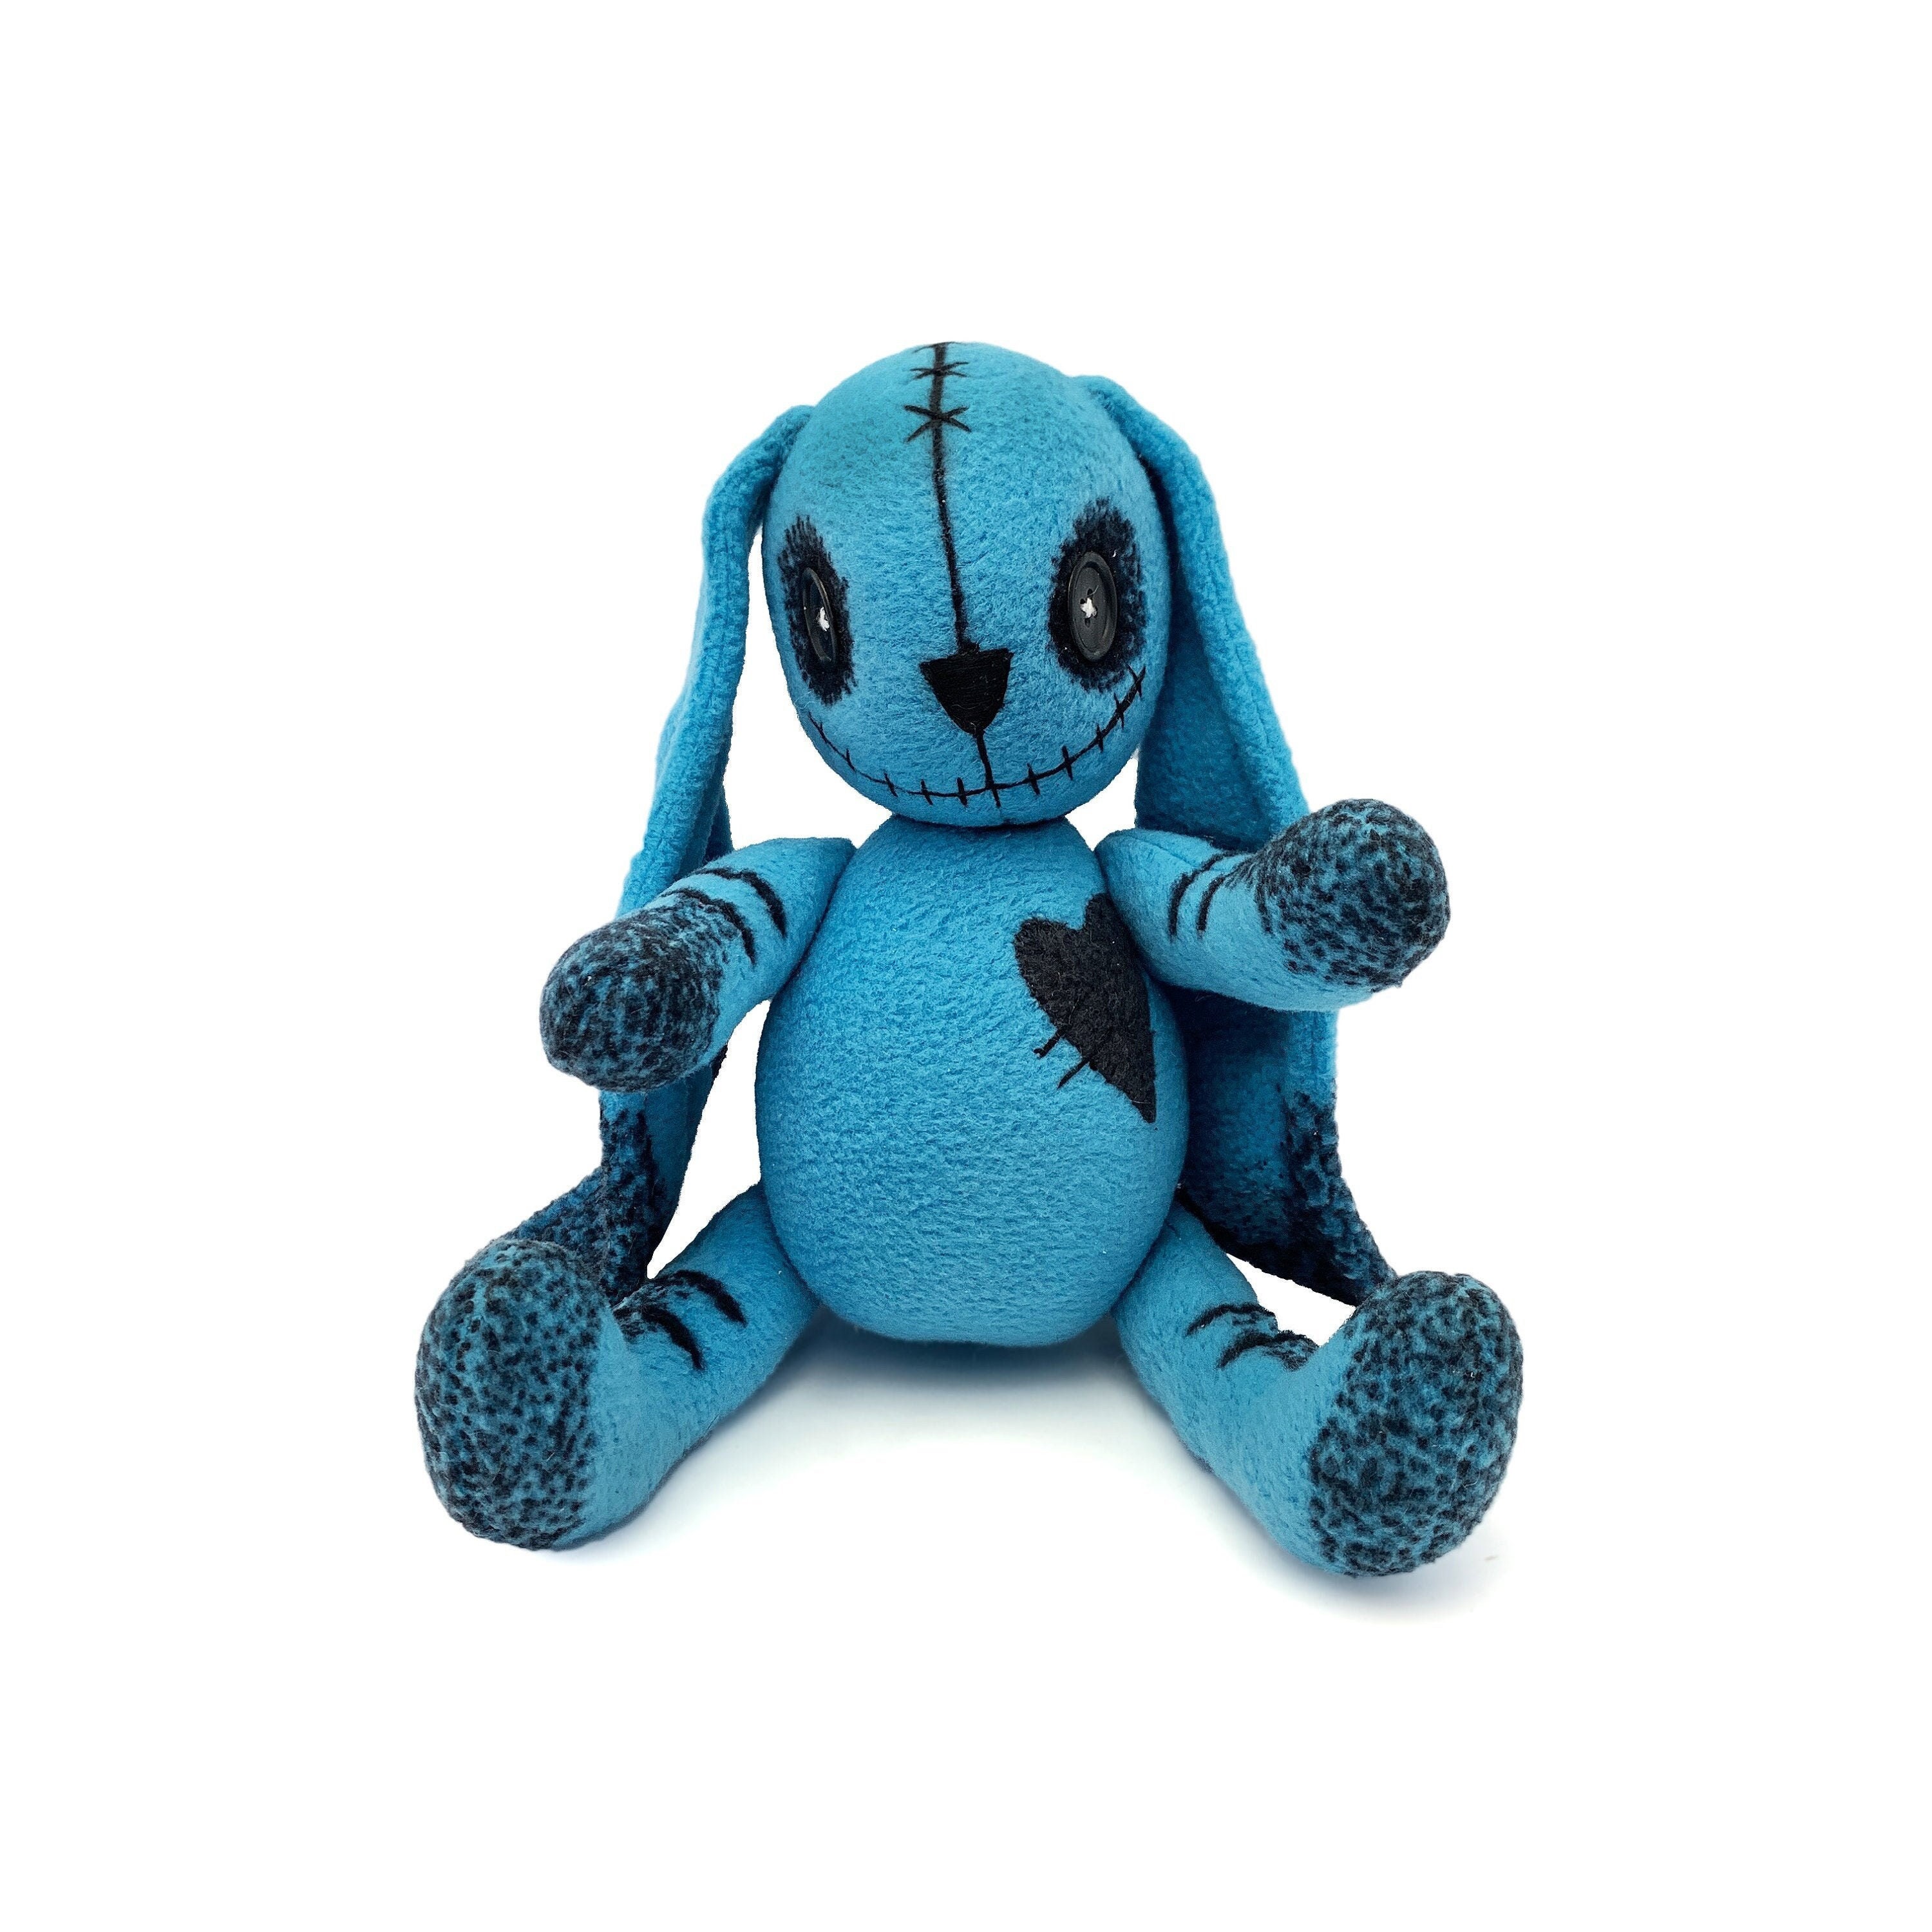 Get Your Quirky On with our Cute Gothic Rabbit Plush Toy - Perfect for Fans  of Alternative Style and Dark Aesthetics - 10 Inches of Soft, Adorable